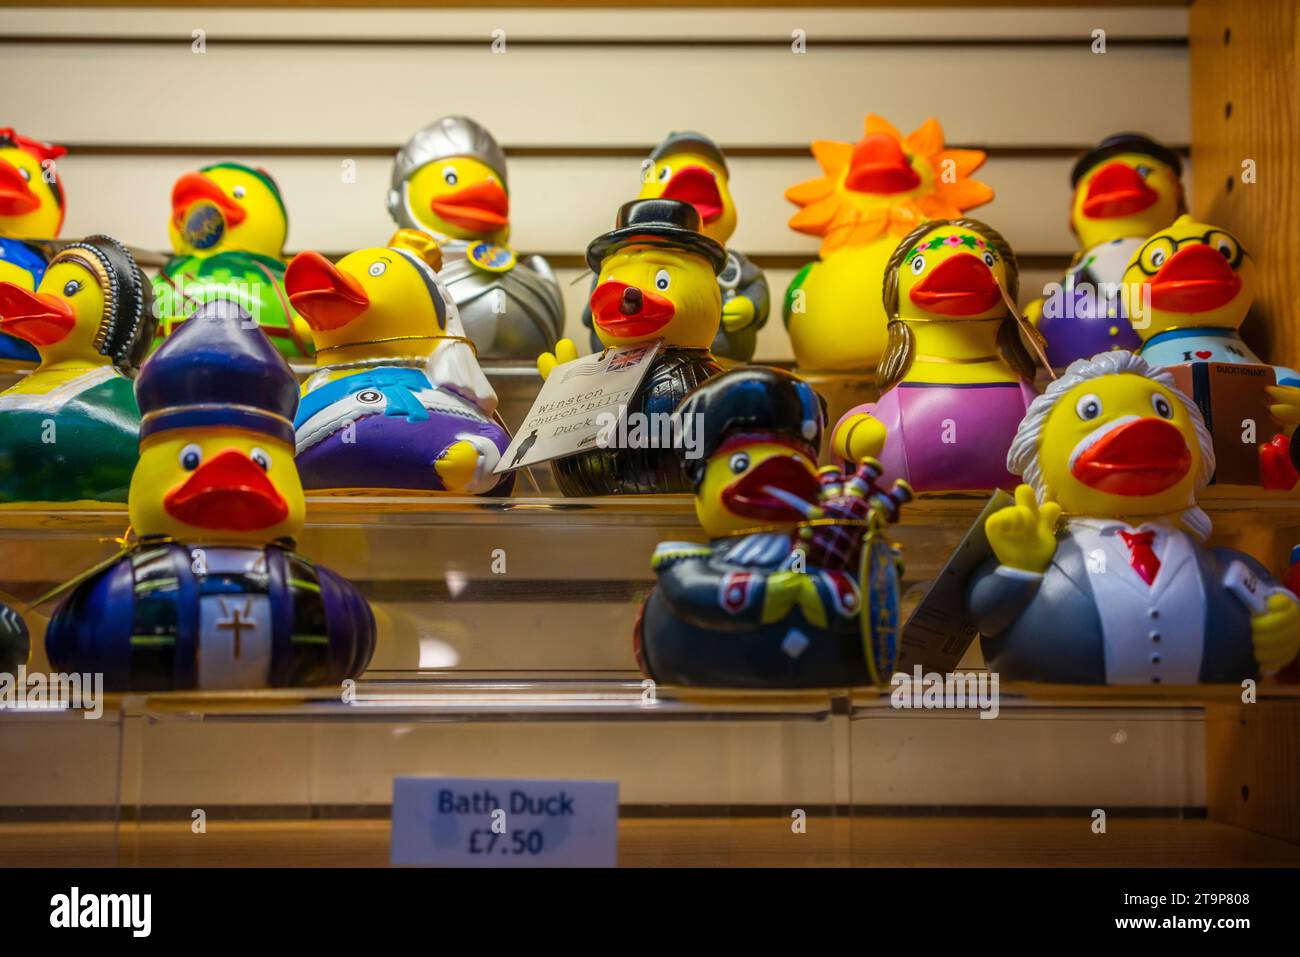 A collection of joke toy ducks on display for sale, England, UK Stock Photo